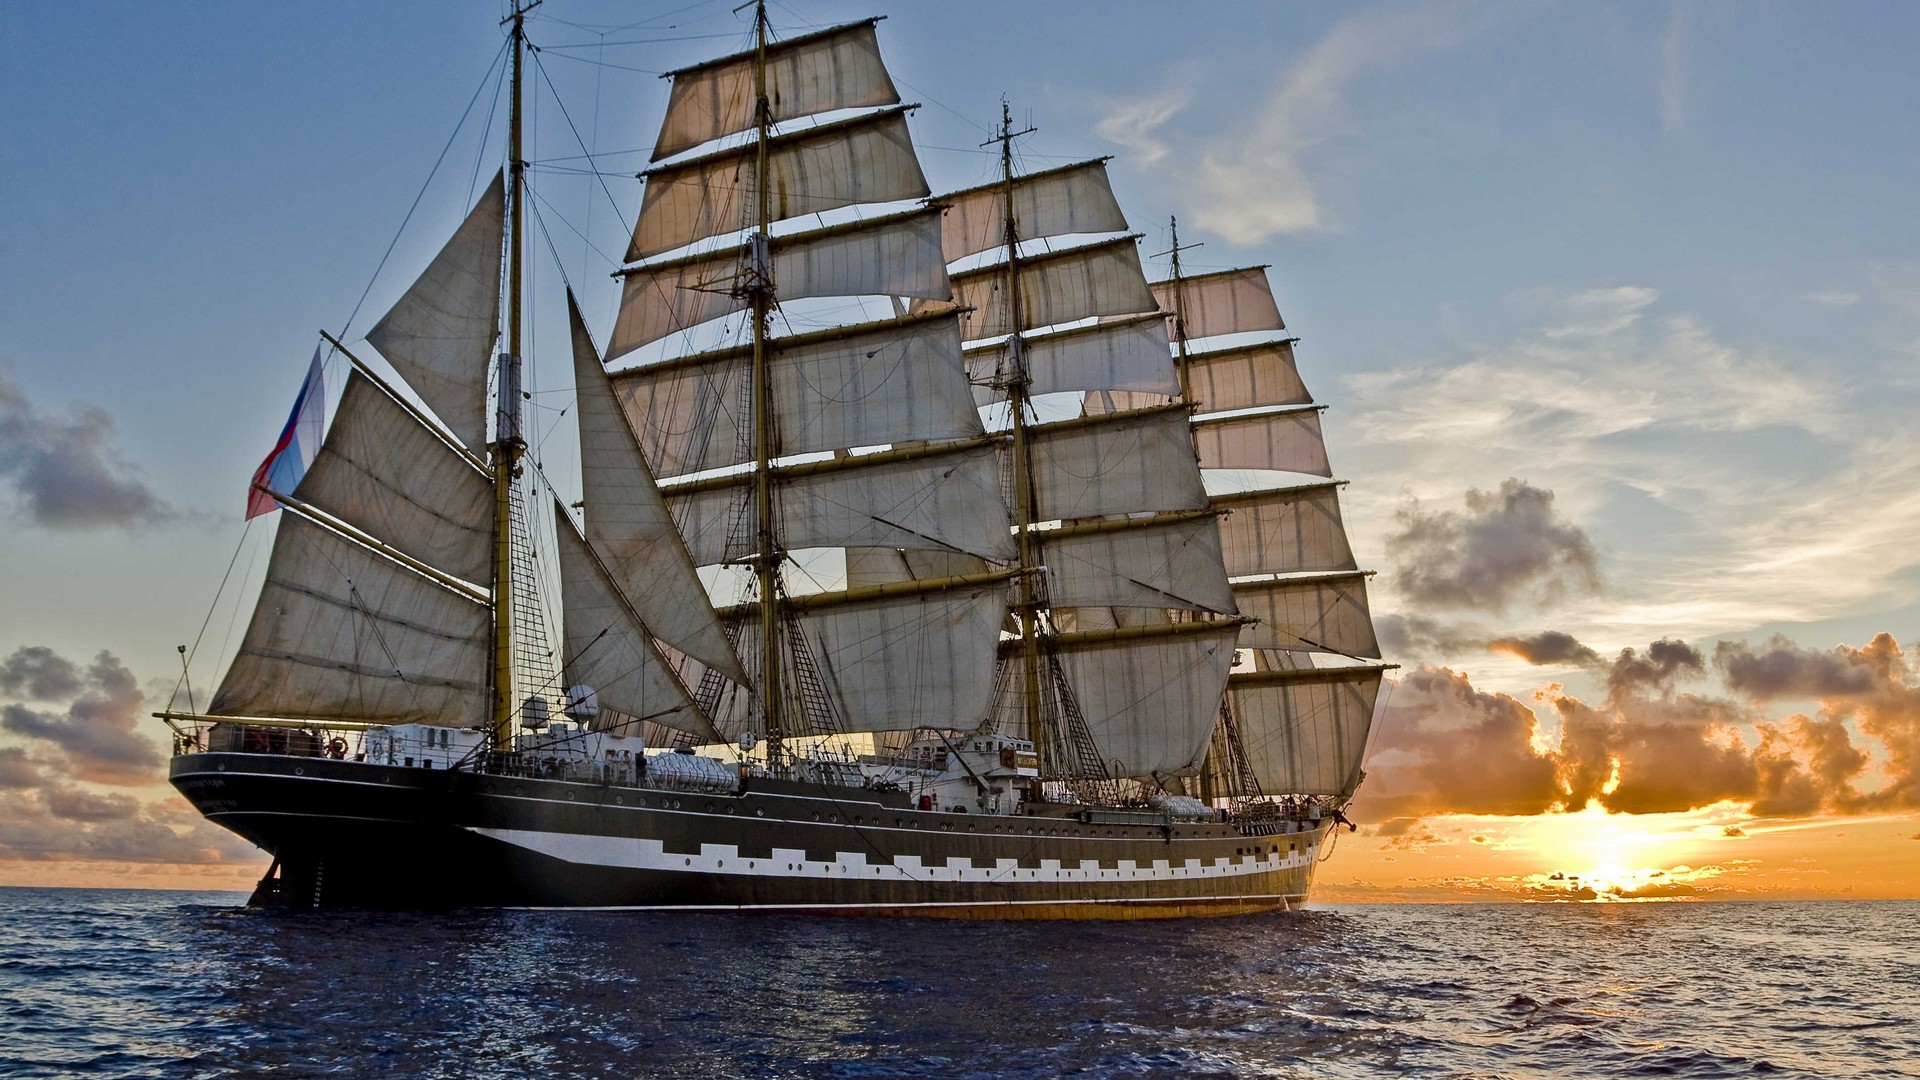 Old Wooden Sailing Ships - Wallpaper Gallery